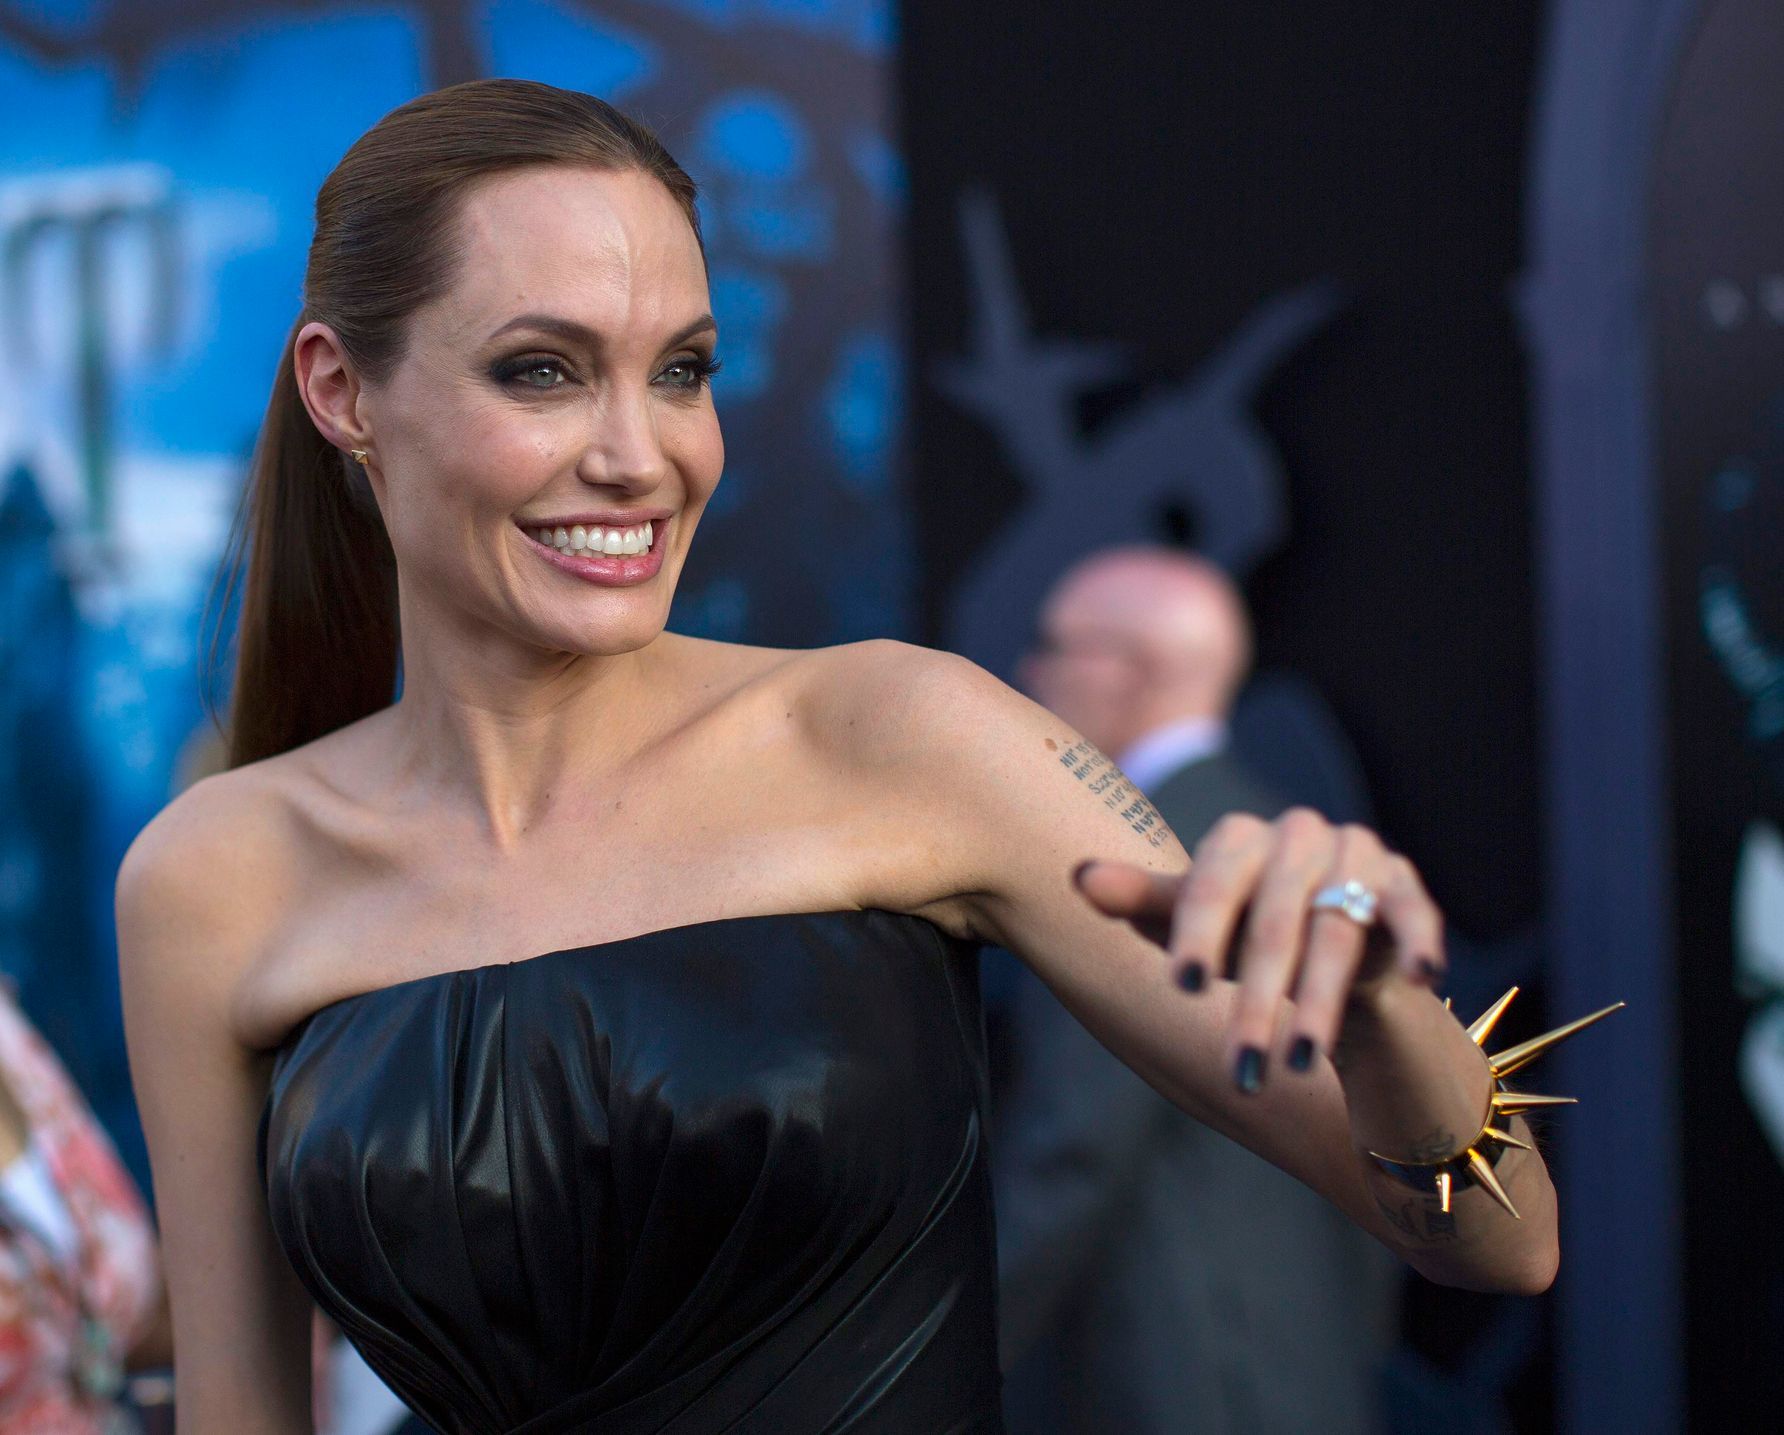 Cast member Jolie attends the premiere of &quot;Maleficent&quot; at El Capitan theatre in Hollywood